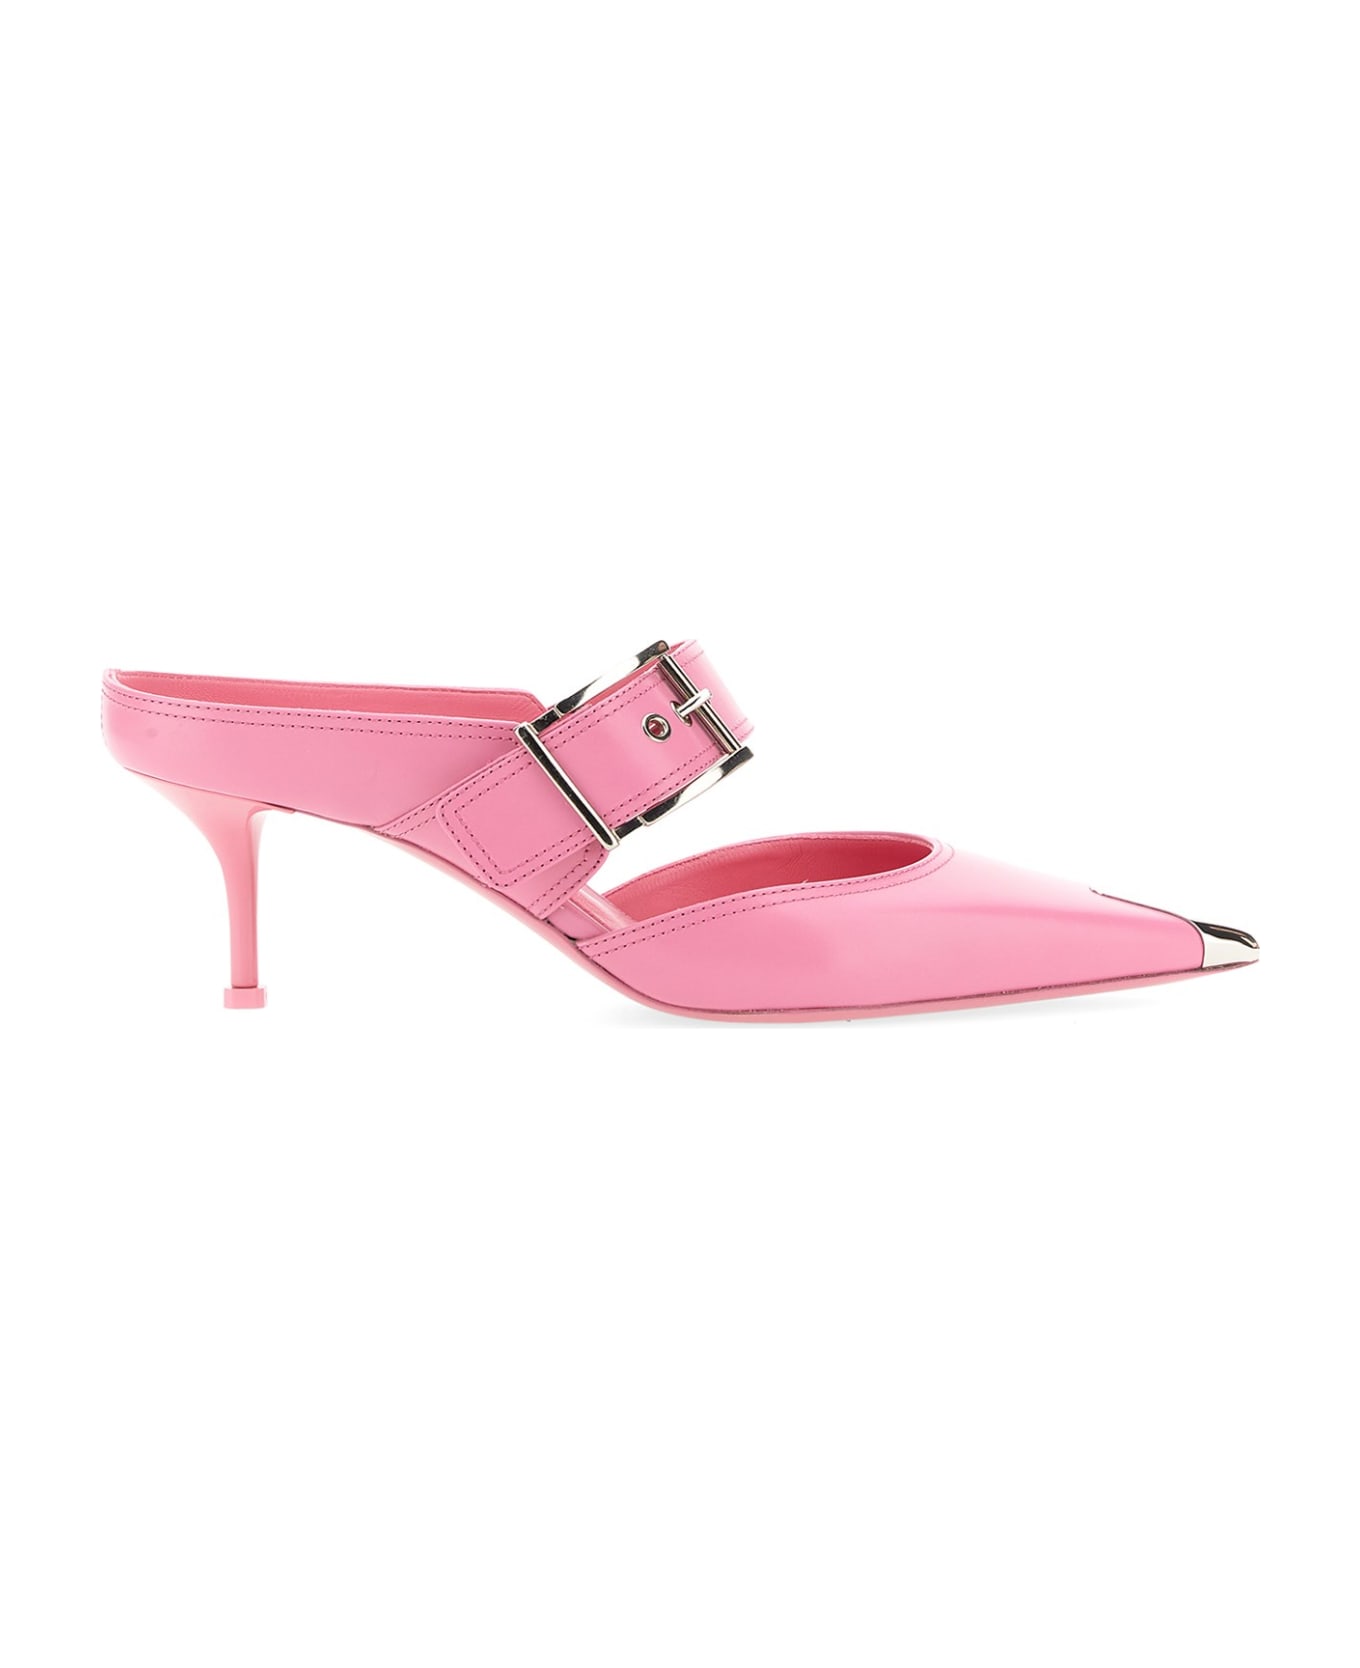 Alexander McQueen Punk Sandal With Buckle - ROSA